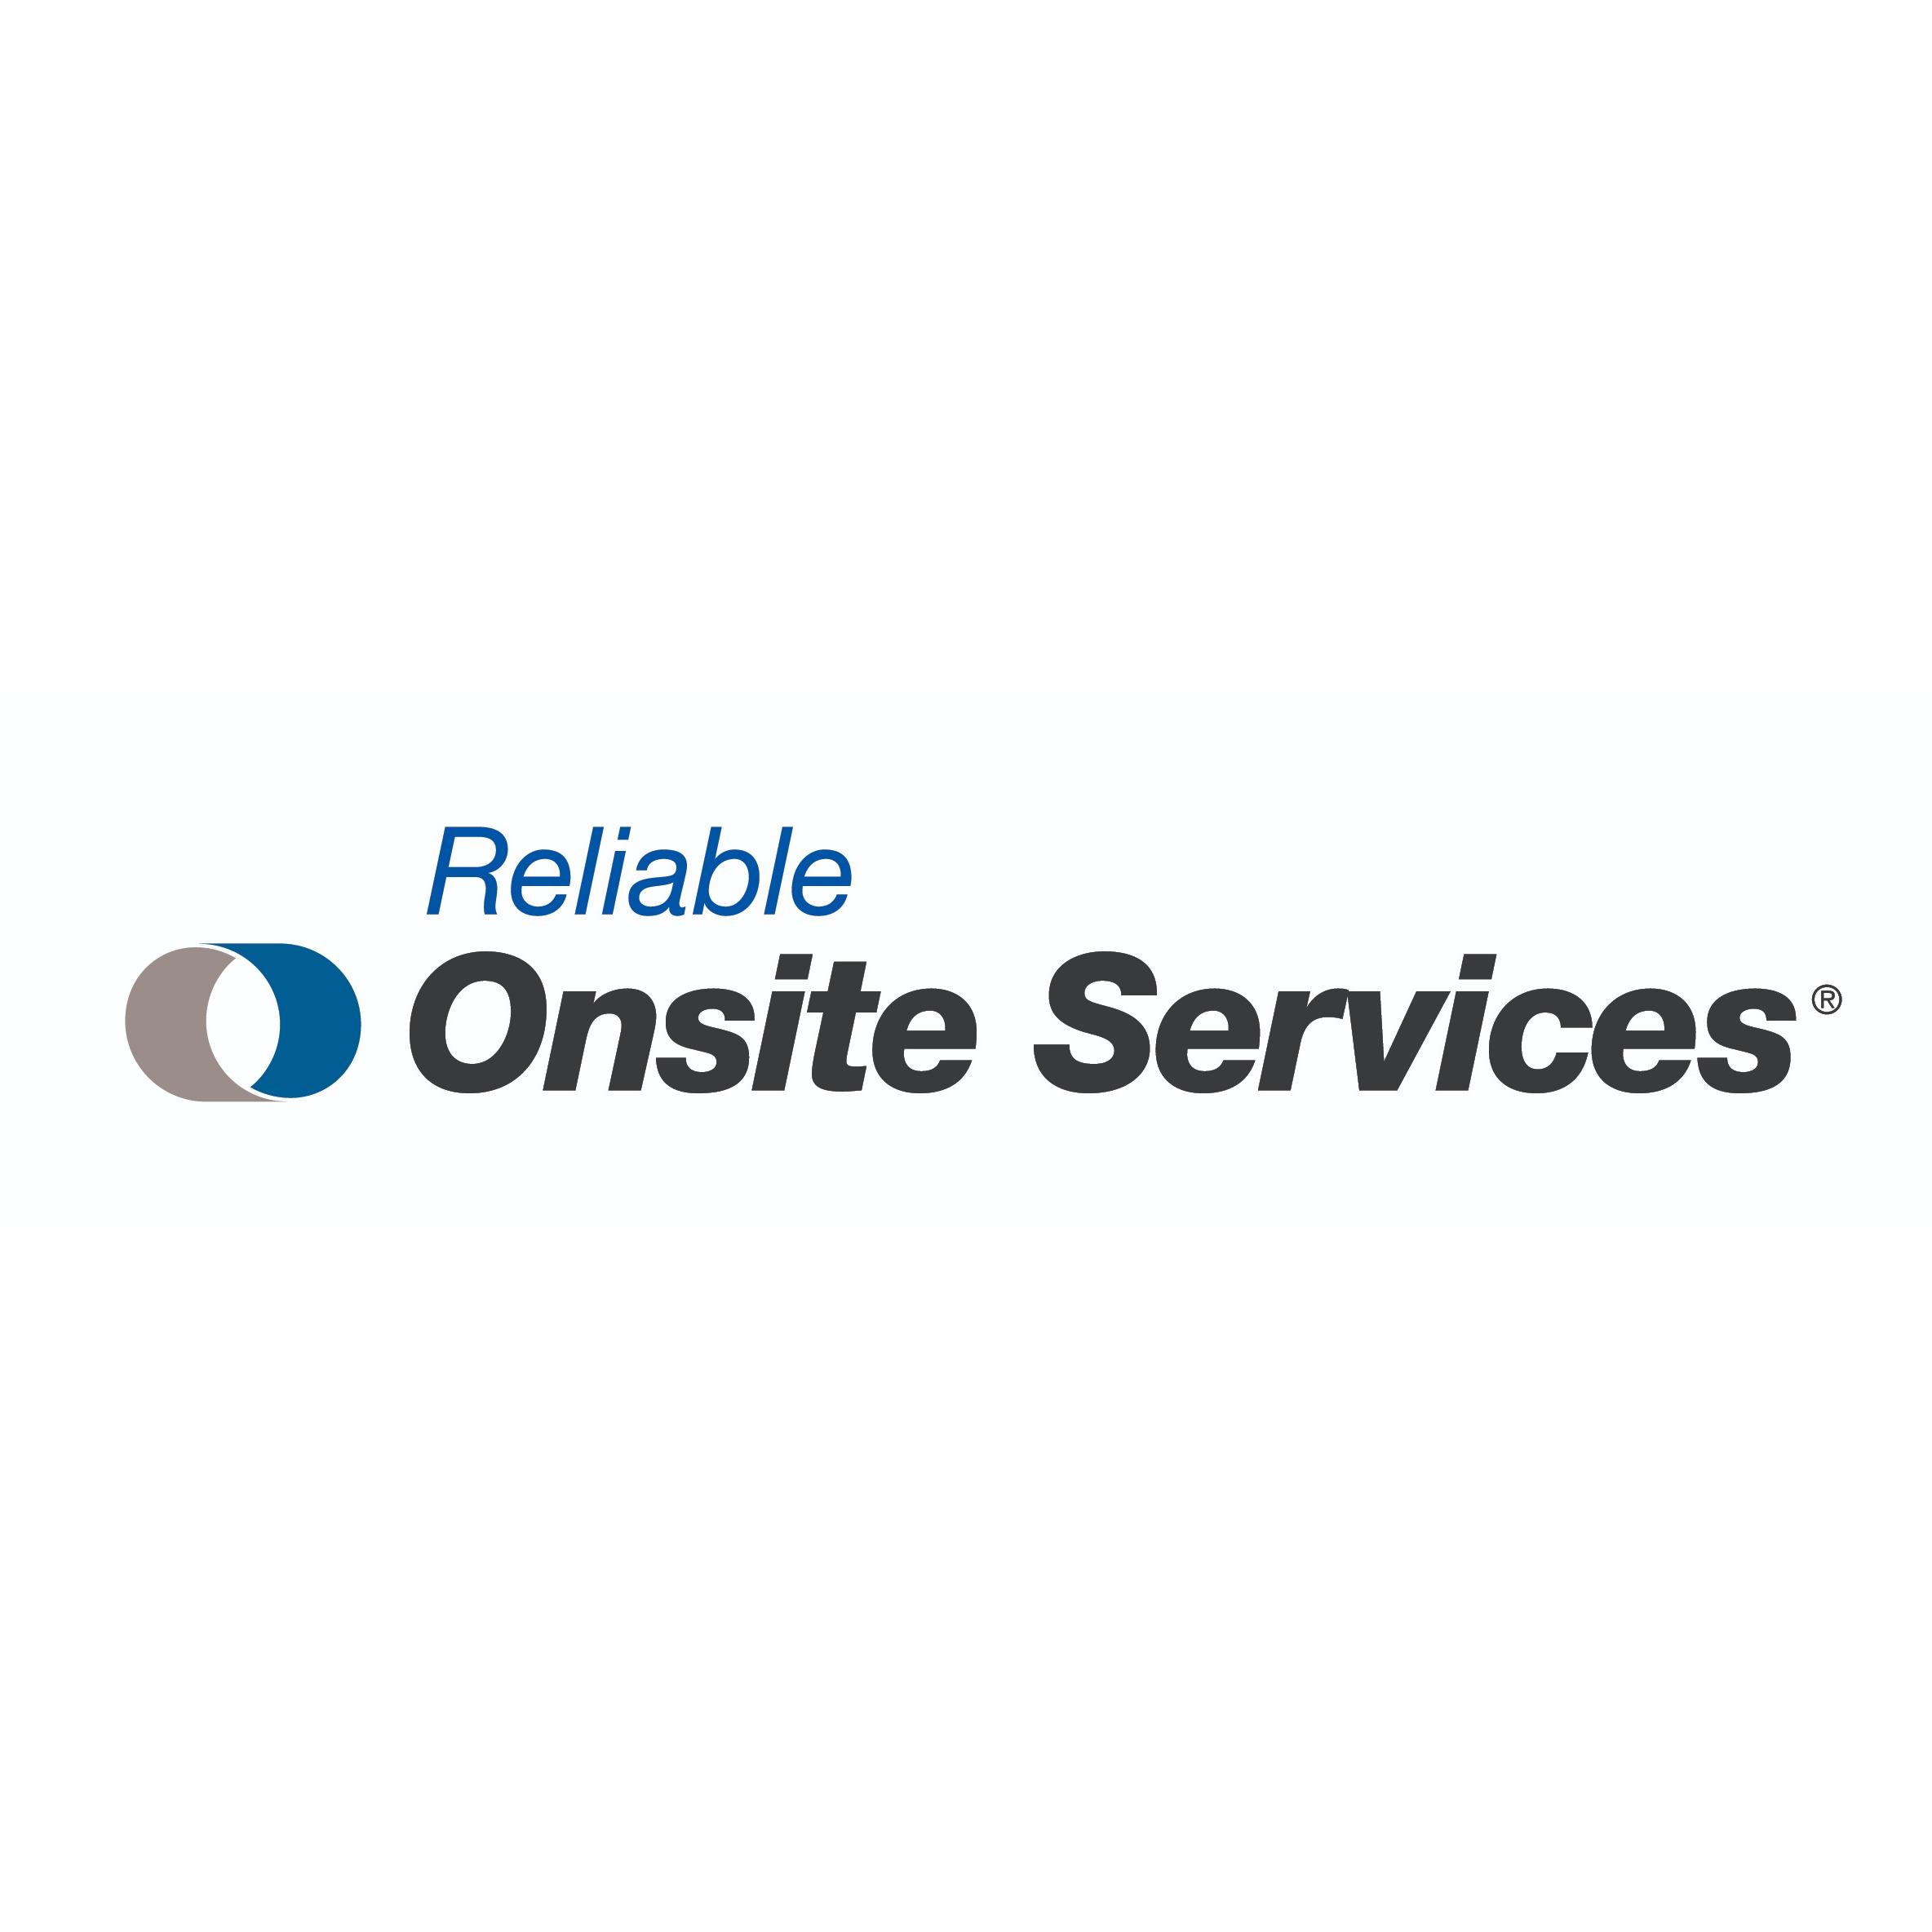 United Rentals - Reliable Onsite Services